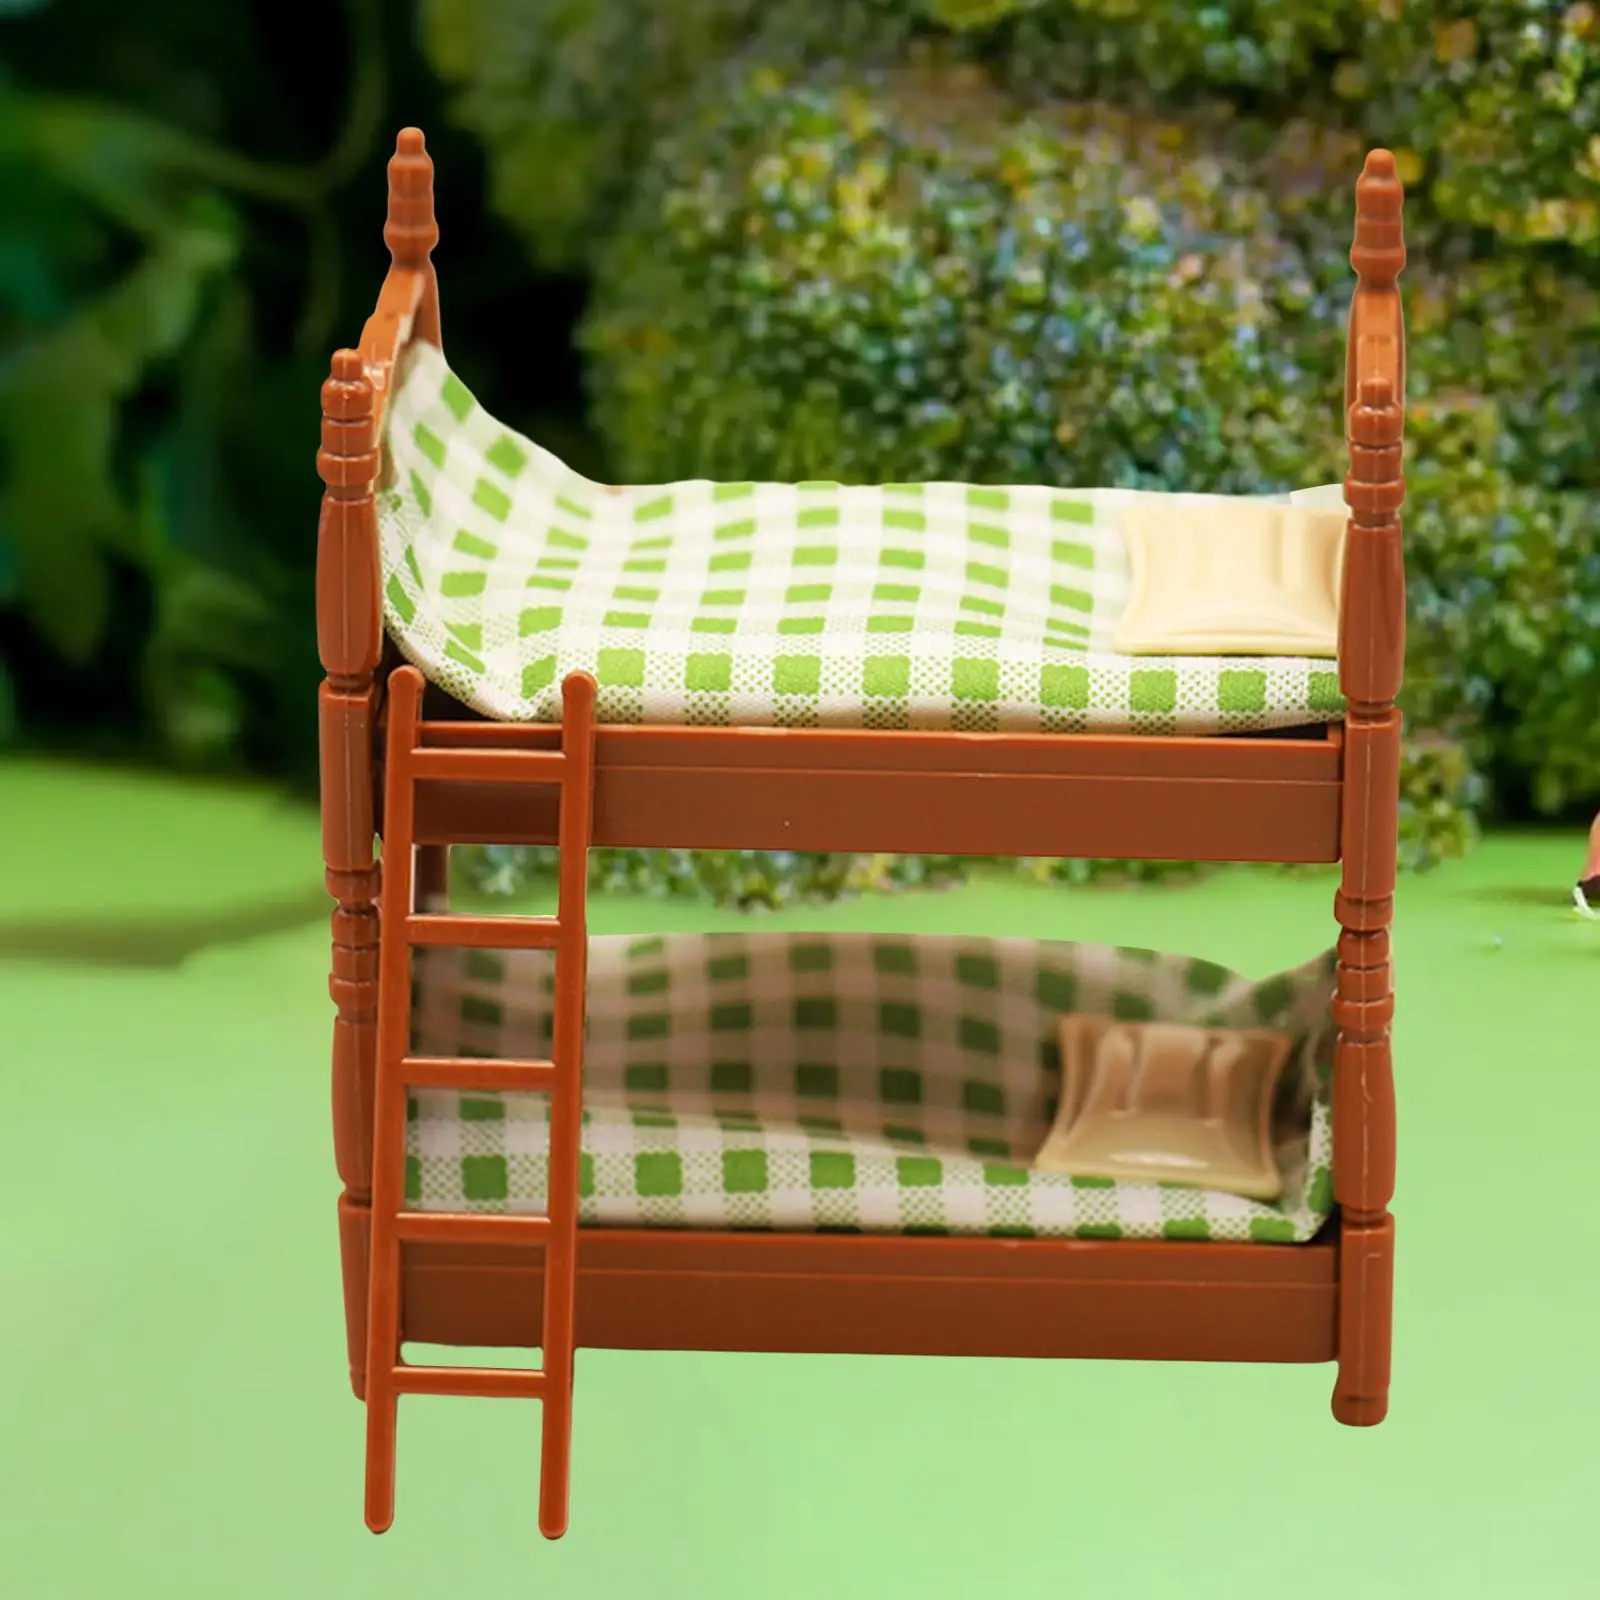 Dollhouse Bunk Bed Gift DIY Crafts Painted Miniature with A Ladder Bedroom Decoration